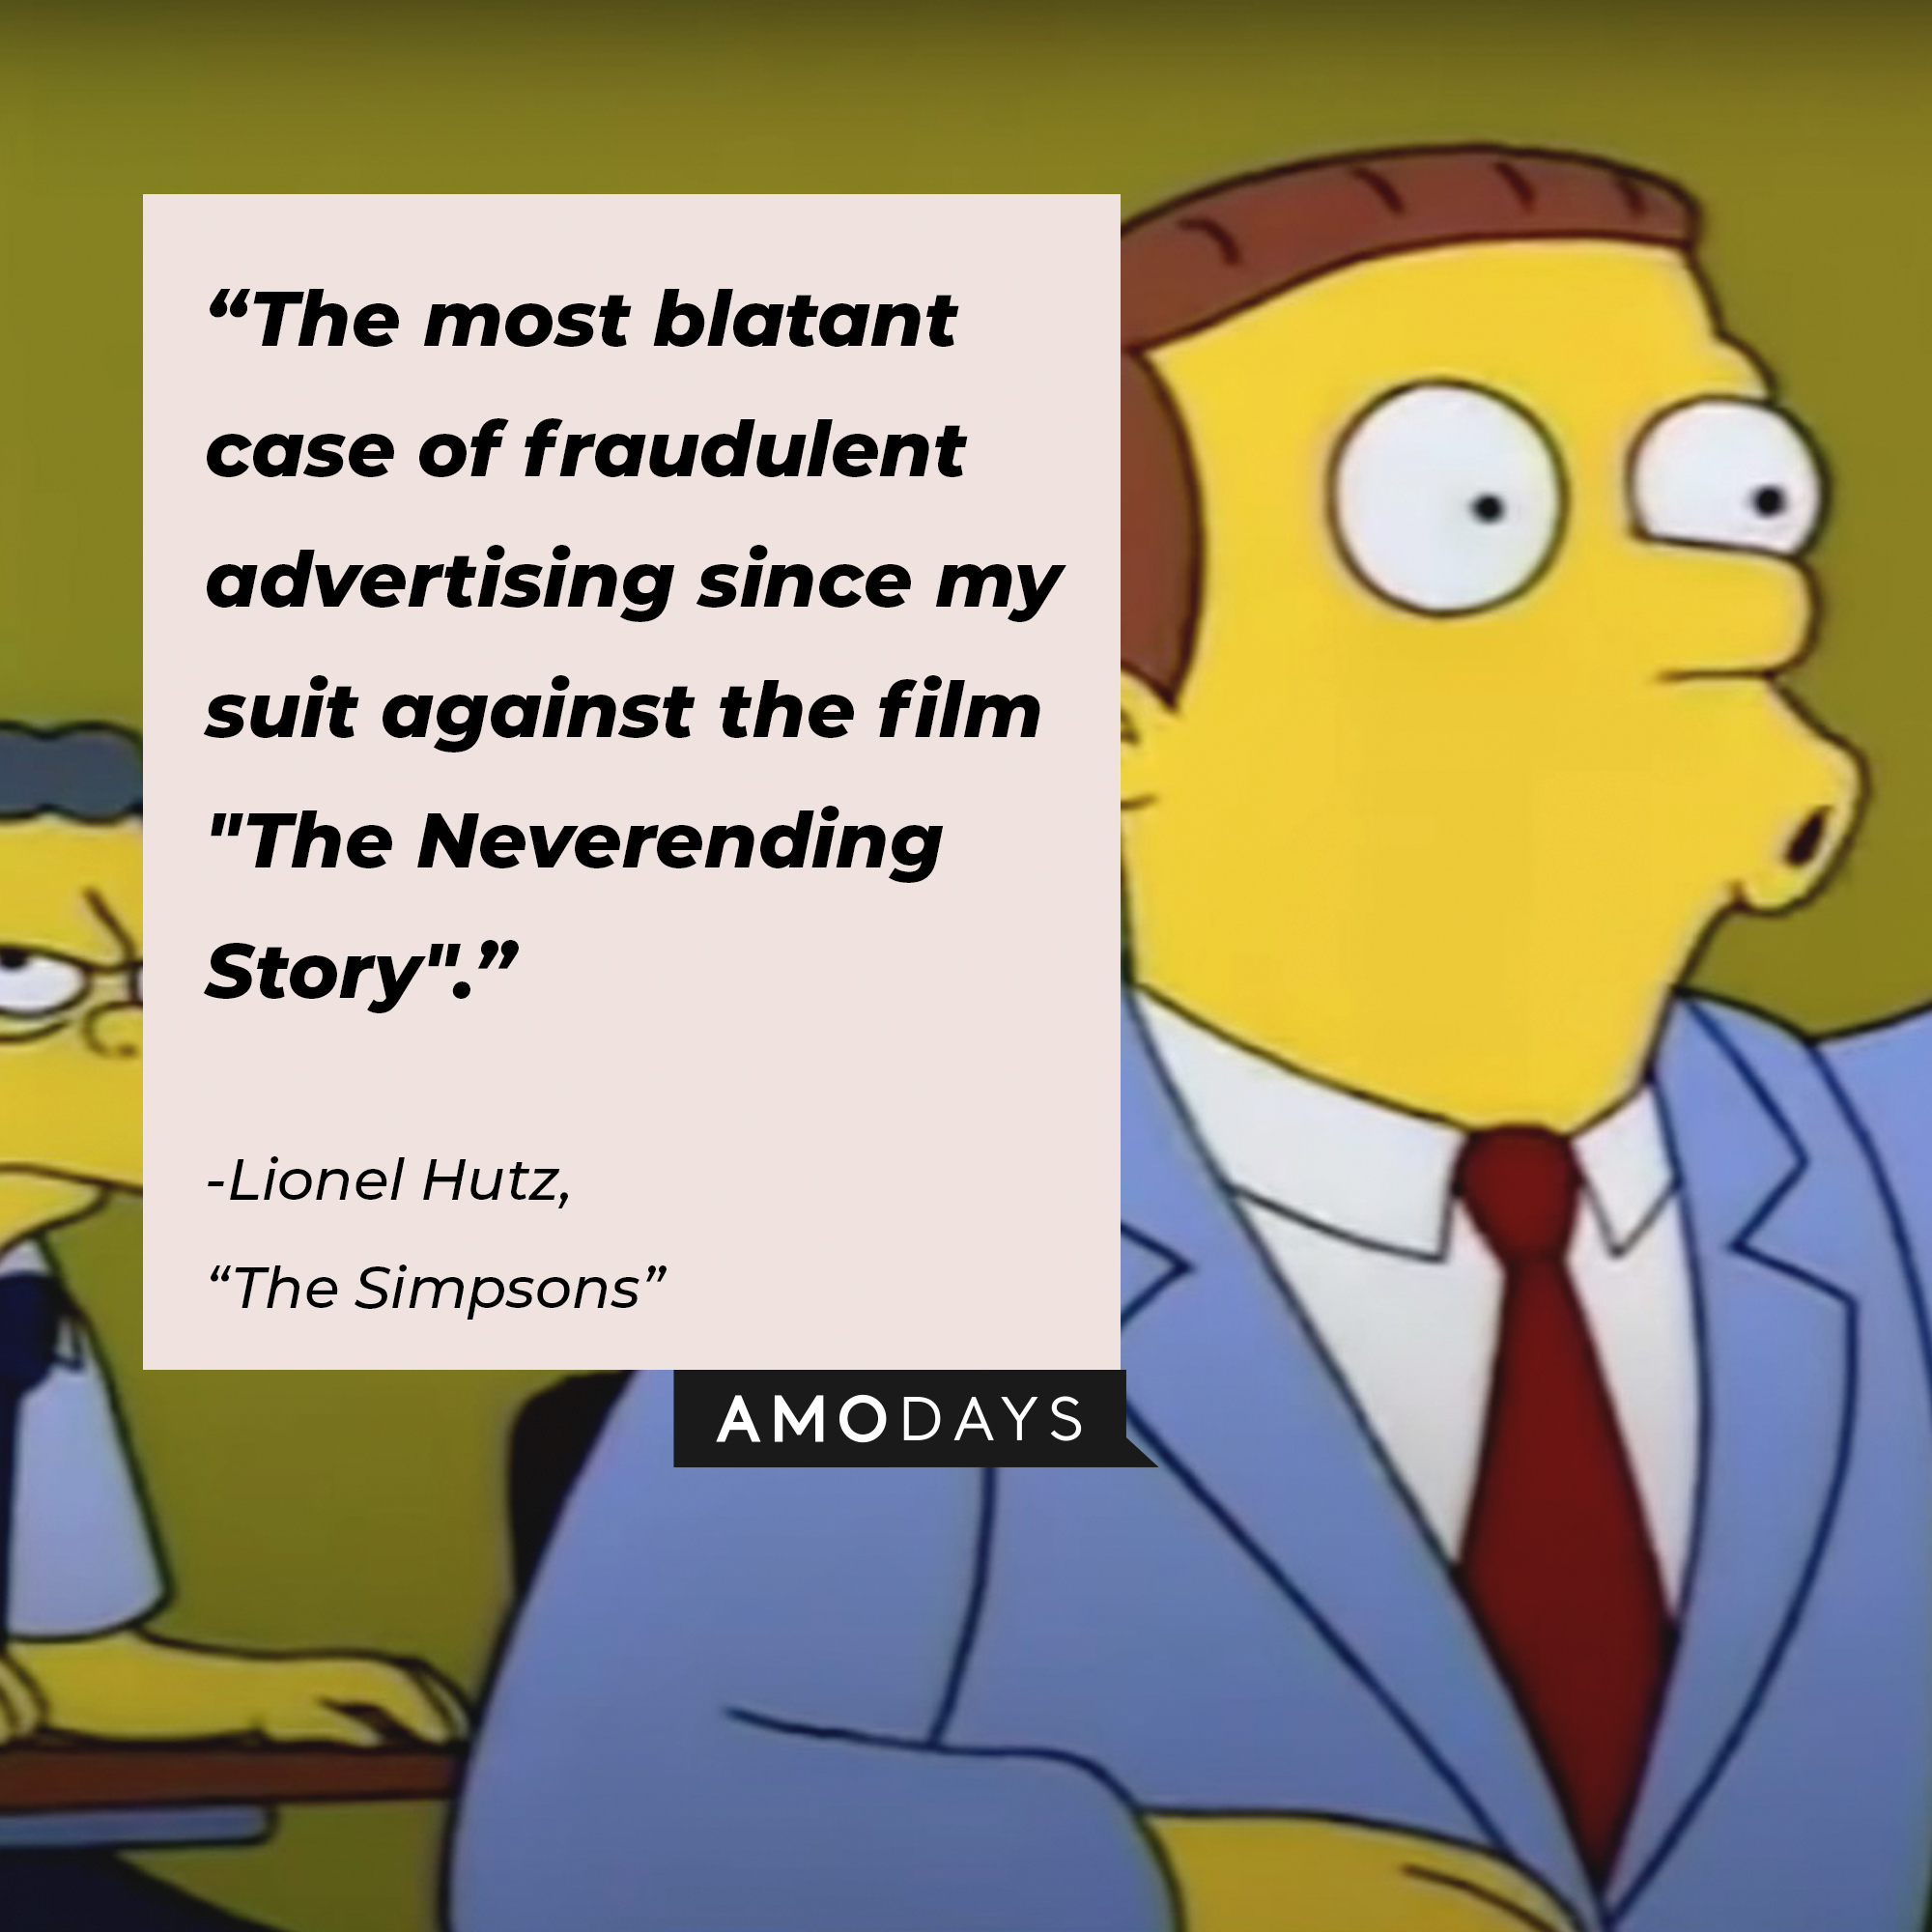 Lionel Hutz’s quote from “The Simpsons”: “The most blatant case of fraudulent advertising since my suit against the film "The Neverending Story".” | Source: facebook.com/TheSimpsons